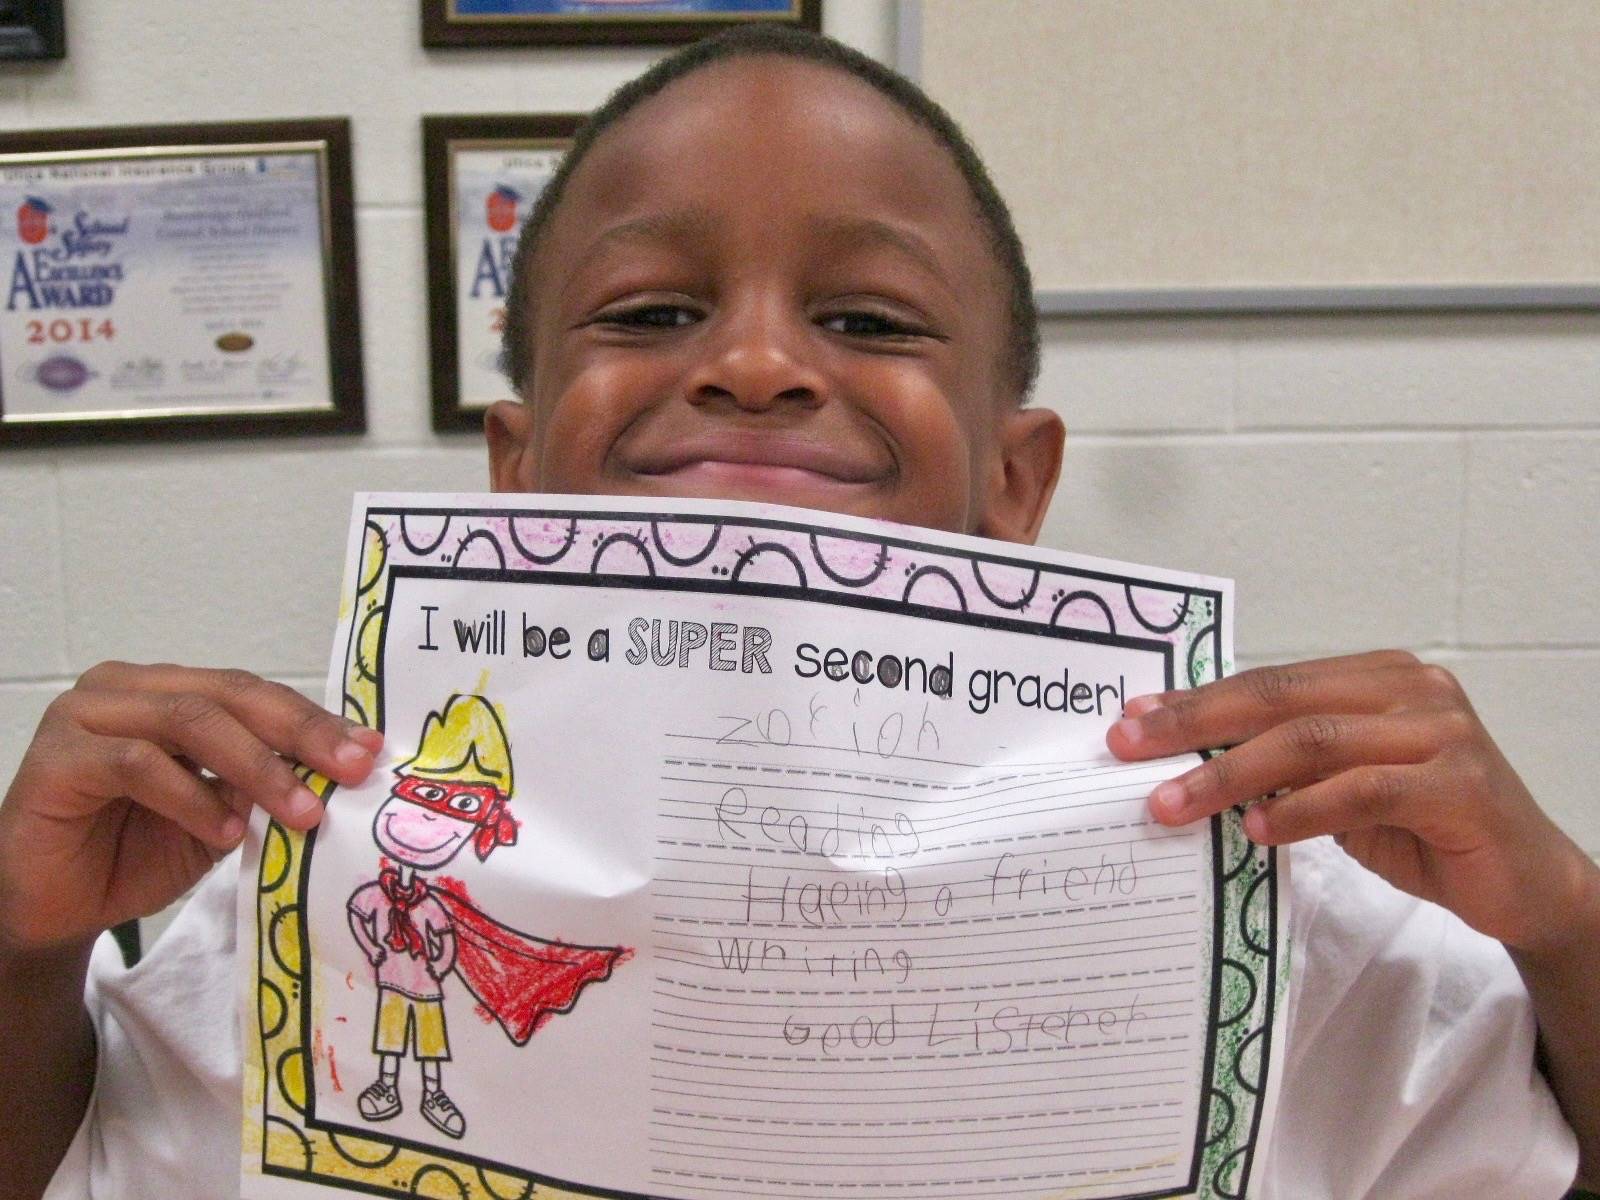 A student shows off superhero student powers.